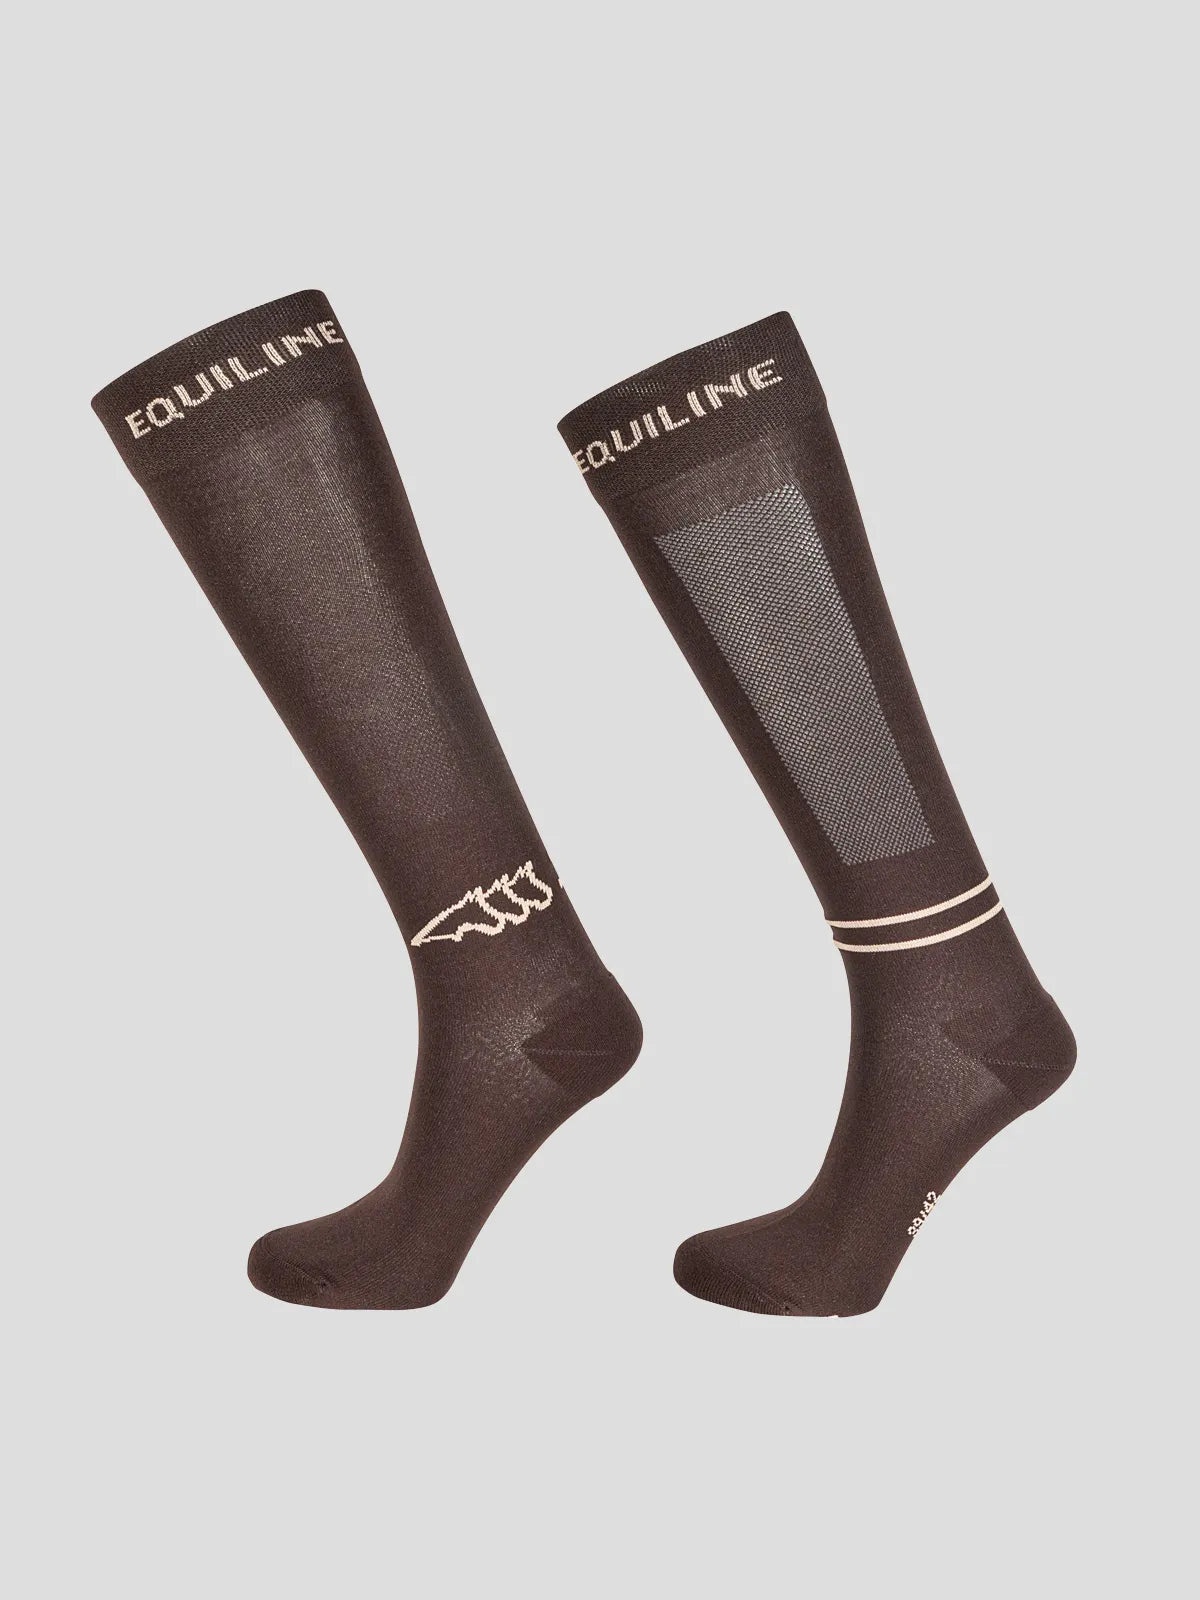 Chaussettes Equiline "Ebele"